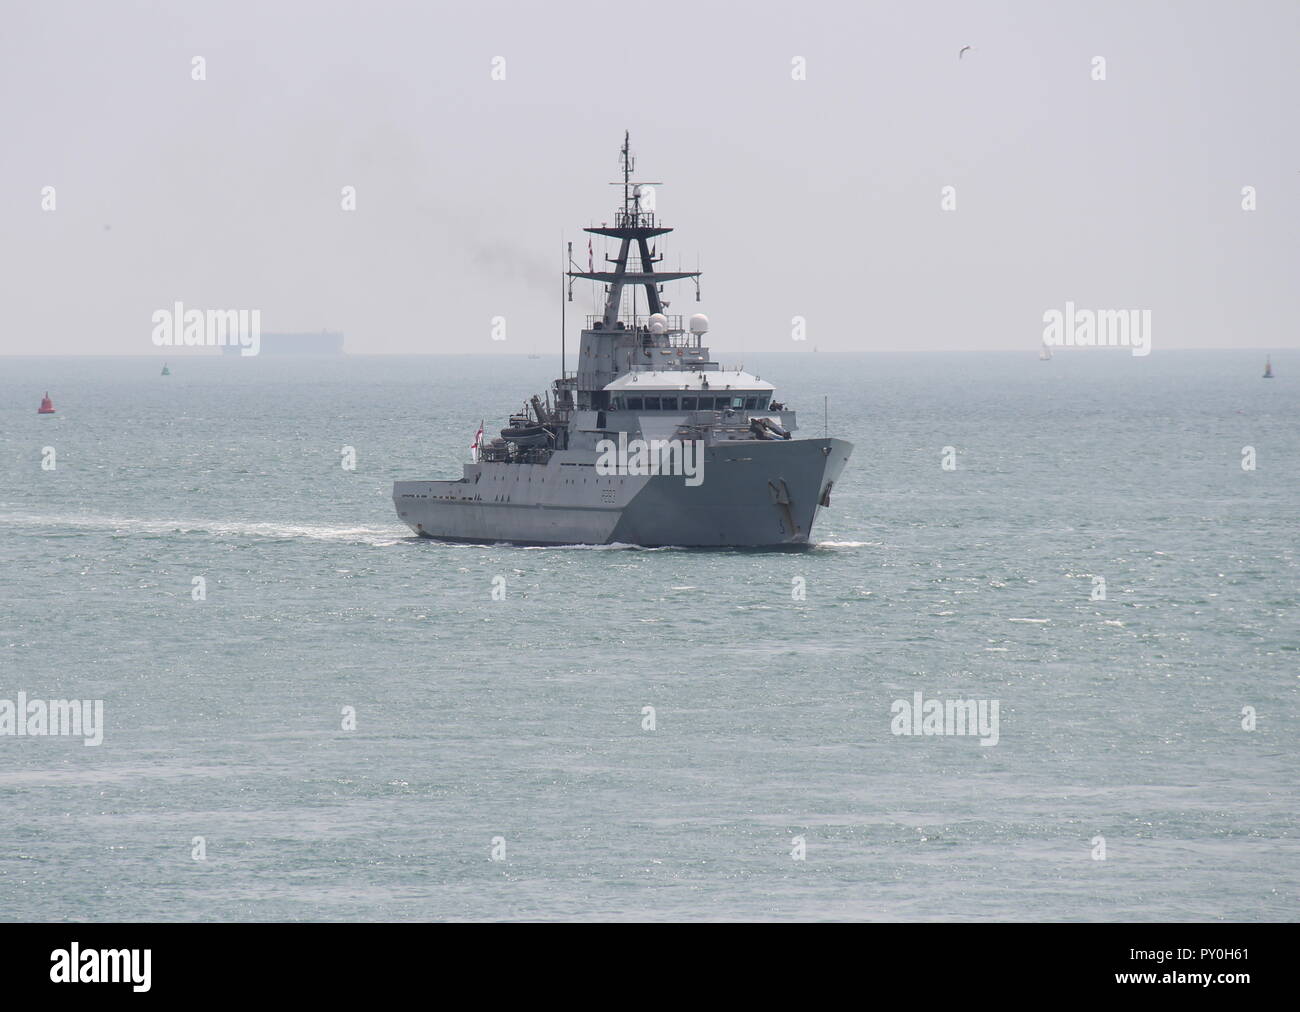 The Royal Navy off-shore patrol vessel HMS Mersey arriving at her home port of Portsmouth, UK on 24th July 2018. Stock Photo